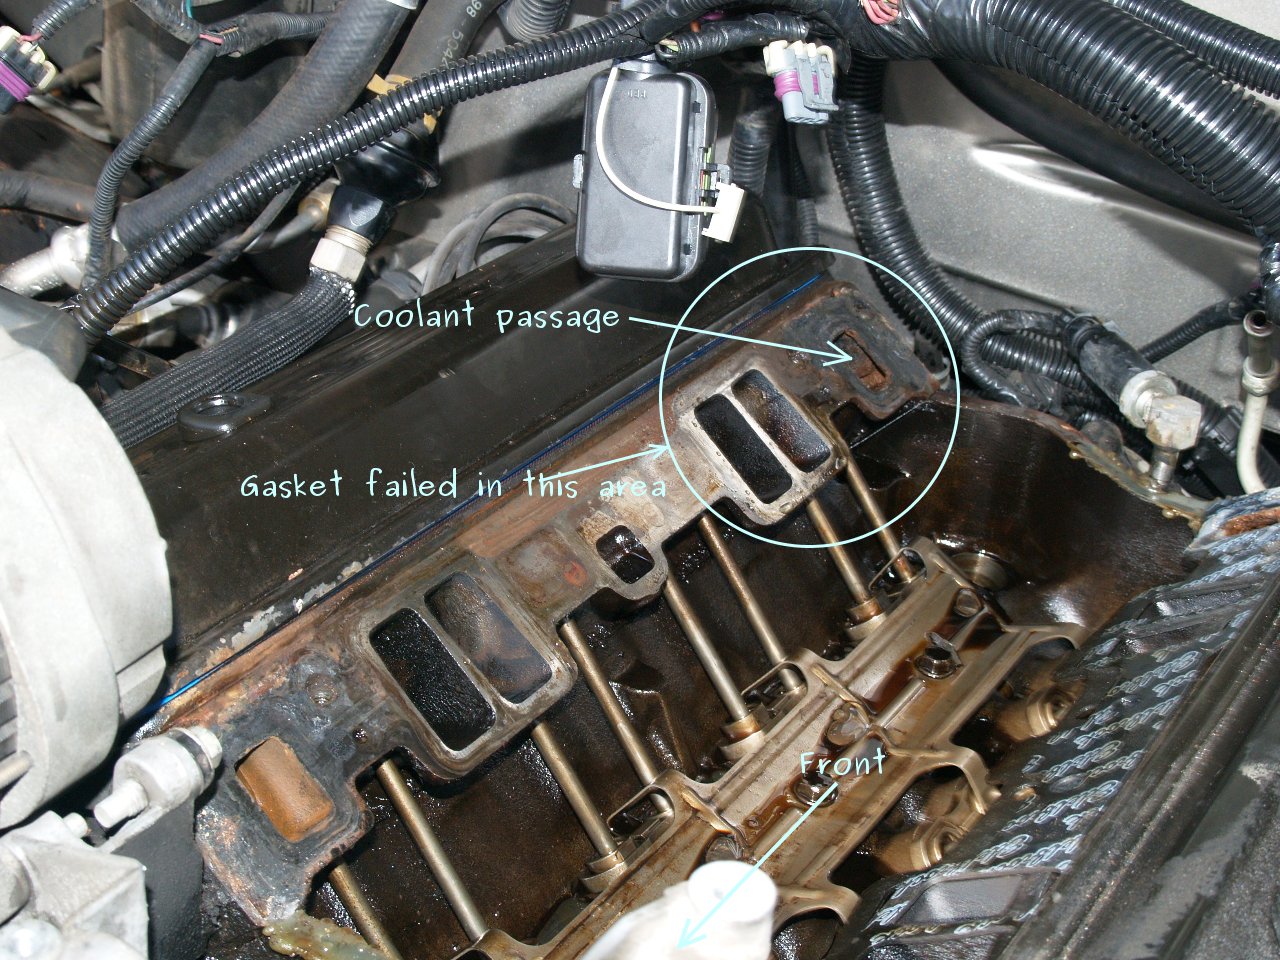 See P0210 in engine